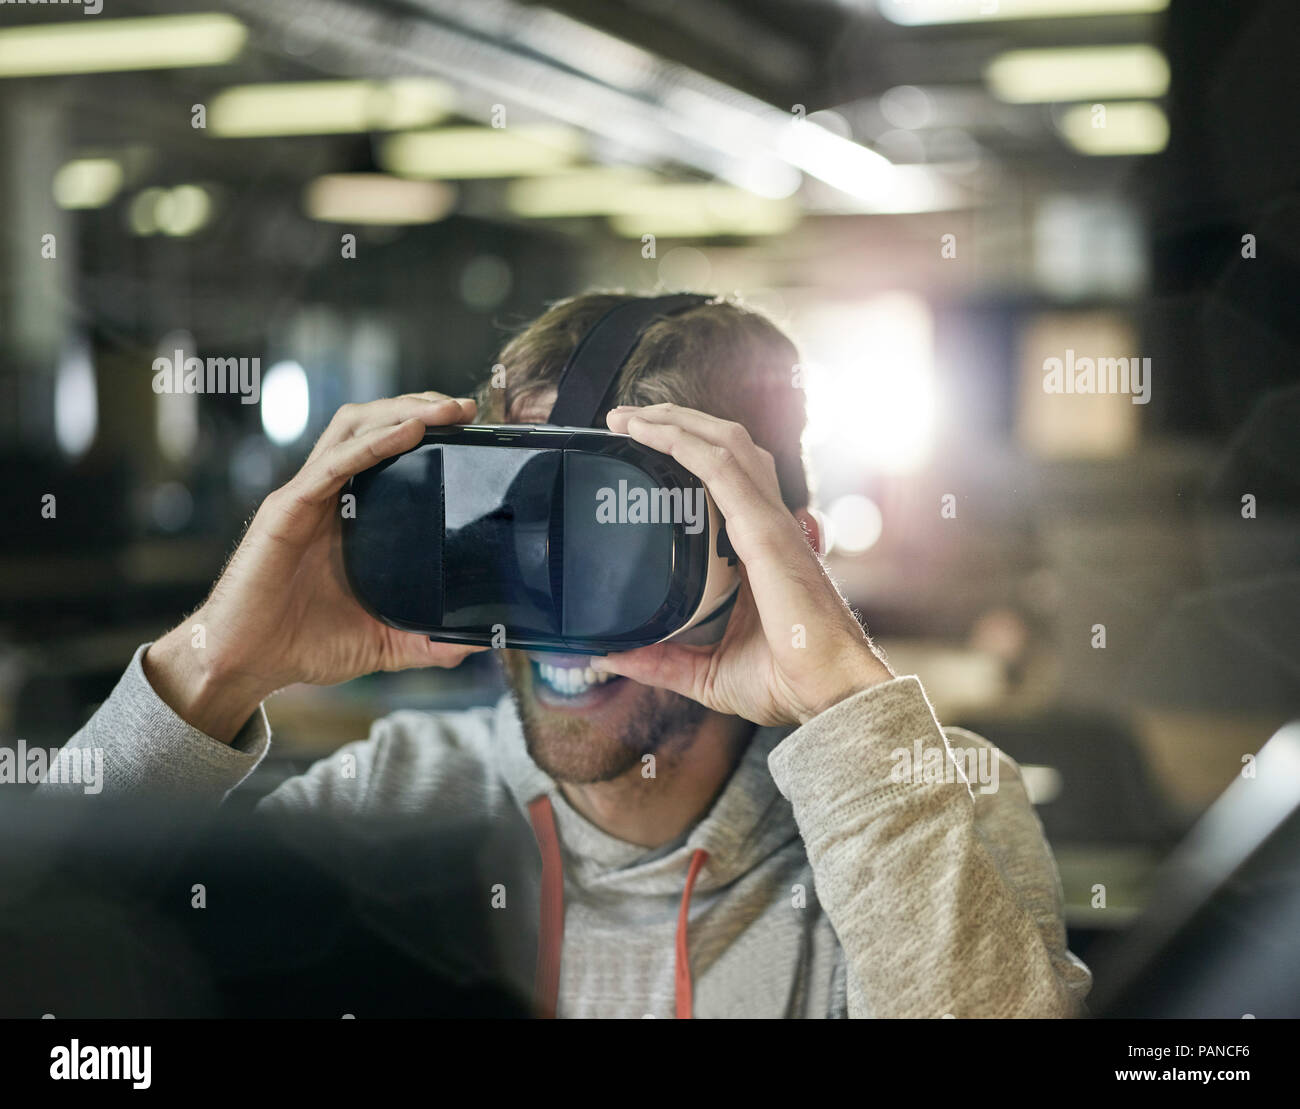 Man working with VR glasses and laptop Stock Photo